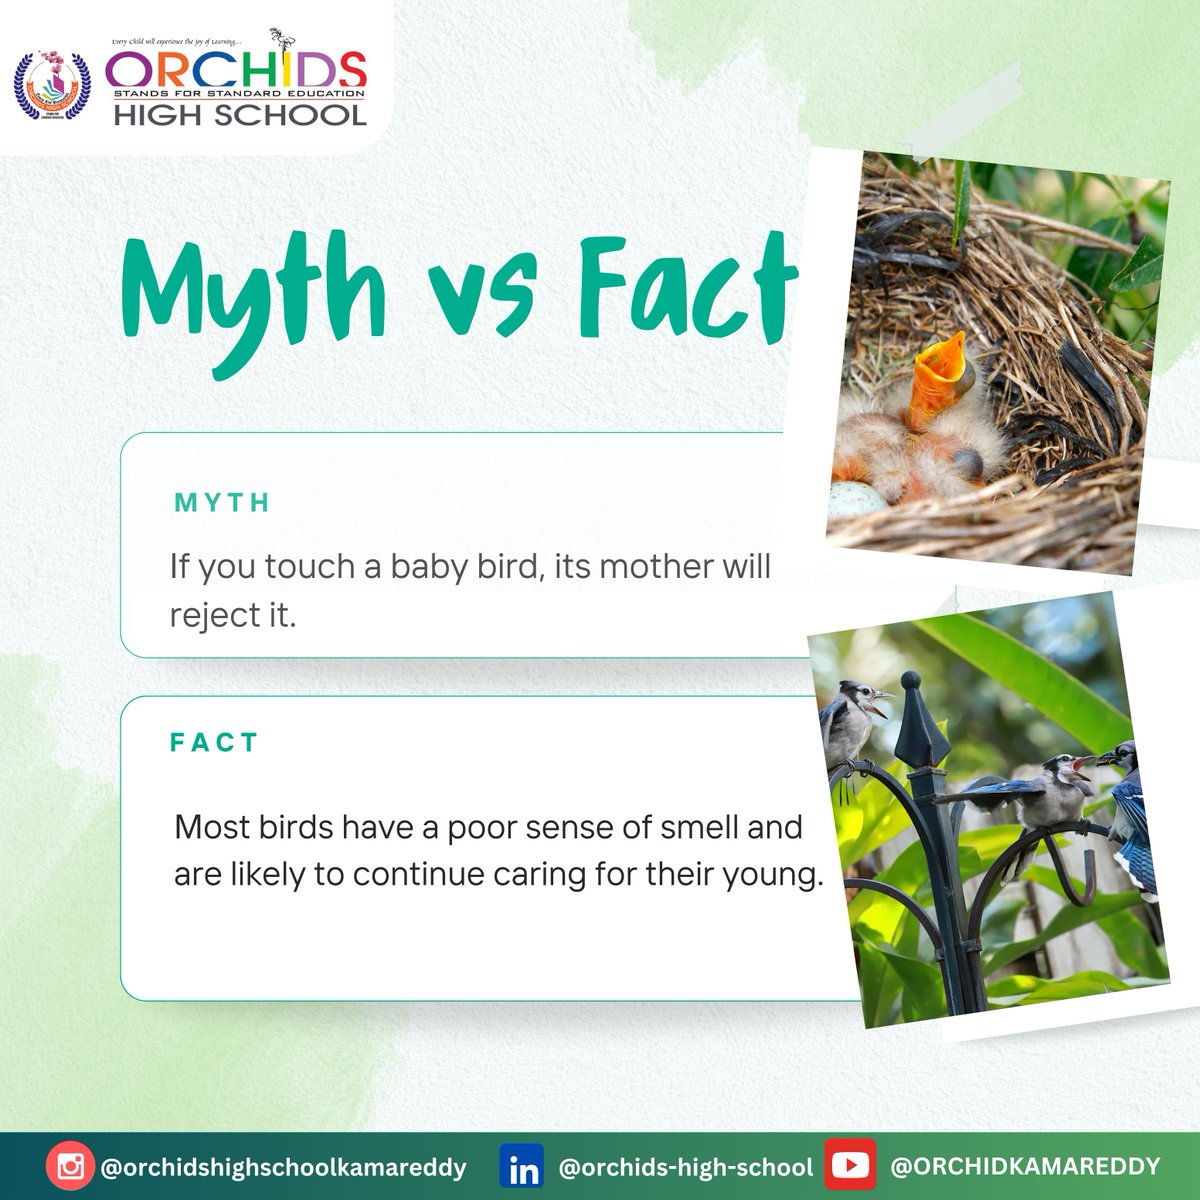 𝐌𝐲𝐭𝐡: If you touch a baby bird, its mother will reject it.
𝐑𝐞𝐚𝐥𝐢𝐭𝐲: Most birds have a poor sense of smell and are likely to continue caring for their young.

#myth #reality #orchidshighschool